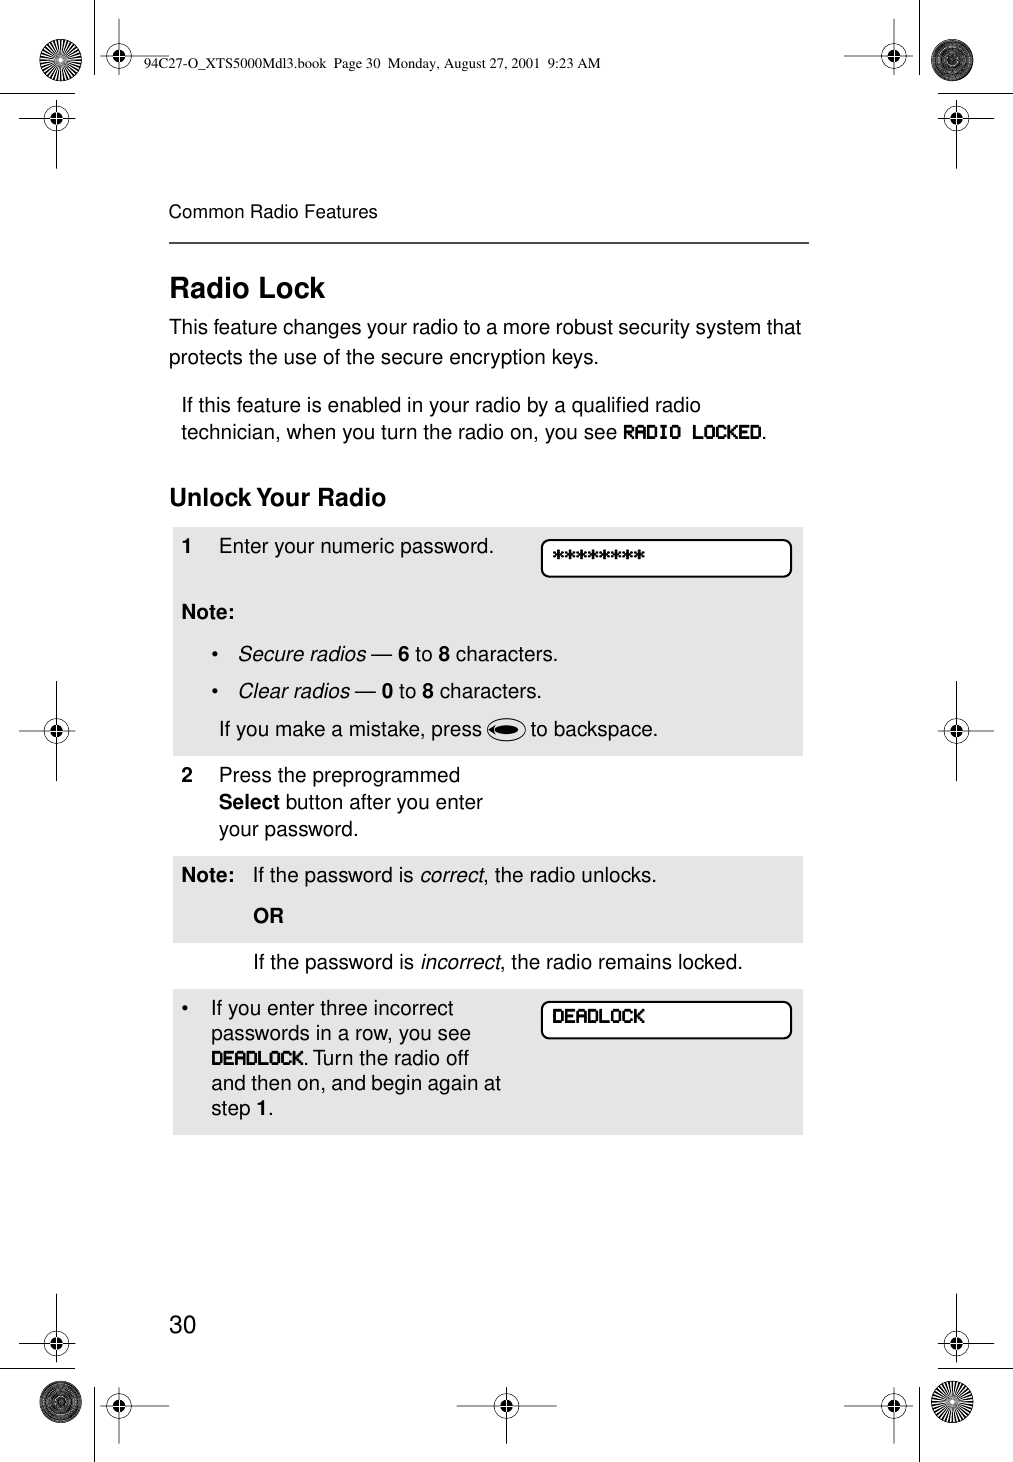 30Common Radio FeaturesRadio LockThis feature changes your radio to a more robust security system that protects the use of the secure encryption keys. Unlock Your  RadioIf this feature is enabled in your radio by a qualiﬁed radio technician, when you turn the radio on, you see RRRRAAAADDDDIIIIOOOO    LLLLOOOOCCCCKKKKEEEEDDDD.1Enter your numeric password.Note:•Secure radios — 6 to 8 characters.•Clear radios — 0 to 8 characters.If you make a mistake, press V to backspace.2Press the preprogrammed Select button after you enter your password.Note: If the password is correct, the radio unlocks.ORIf the password is incorrect, the radio remains locked. • If you enter three incorrect passwords in a row, you see DDDDEEEEAAAADDDDLLLLOOOOCCCCKKKK. Turn the radio off and then on, and begin again at step 1.********************************DDDDEEEEAAAADDDDLLLLOOOOCCCCKKKK94C27-O_XTS5000Mdl3.book  Page 30  Monday, August 27, 2001  9:23 AM